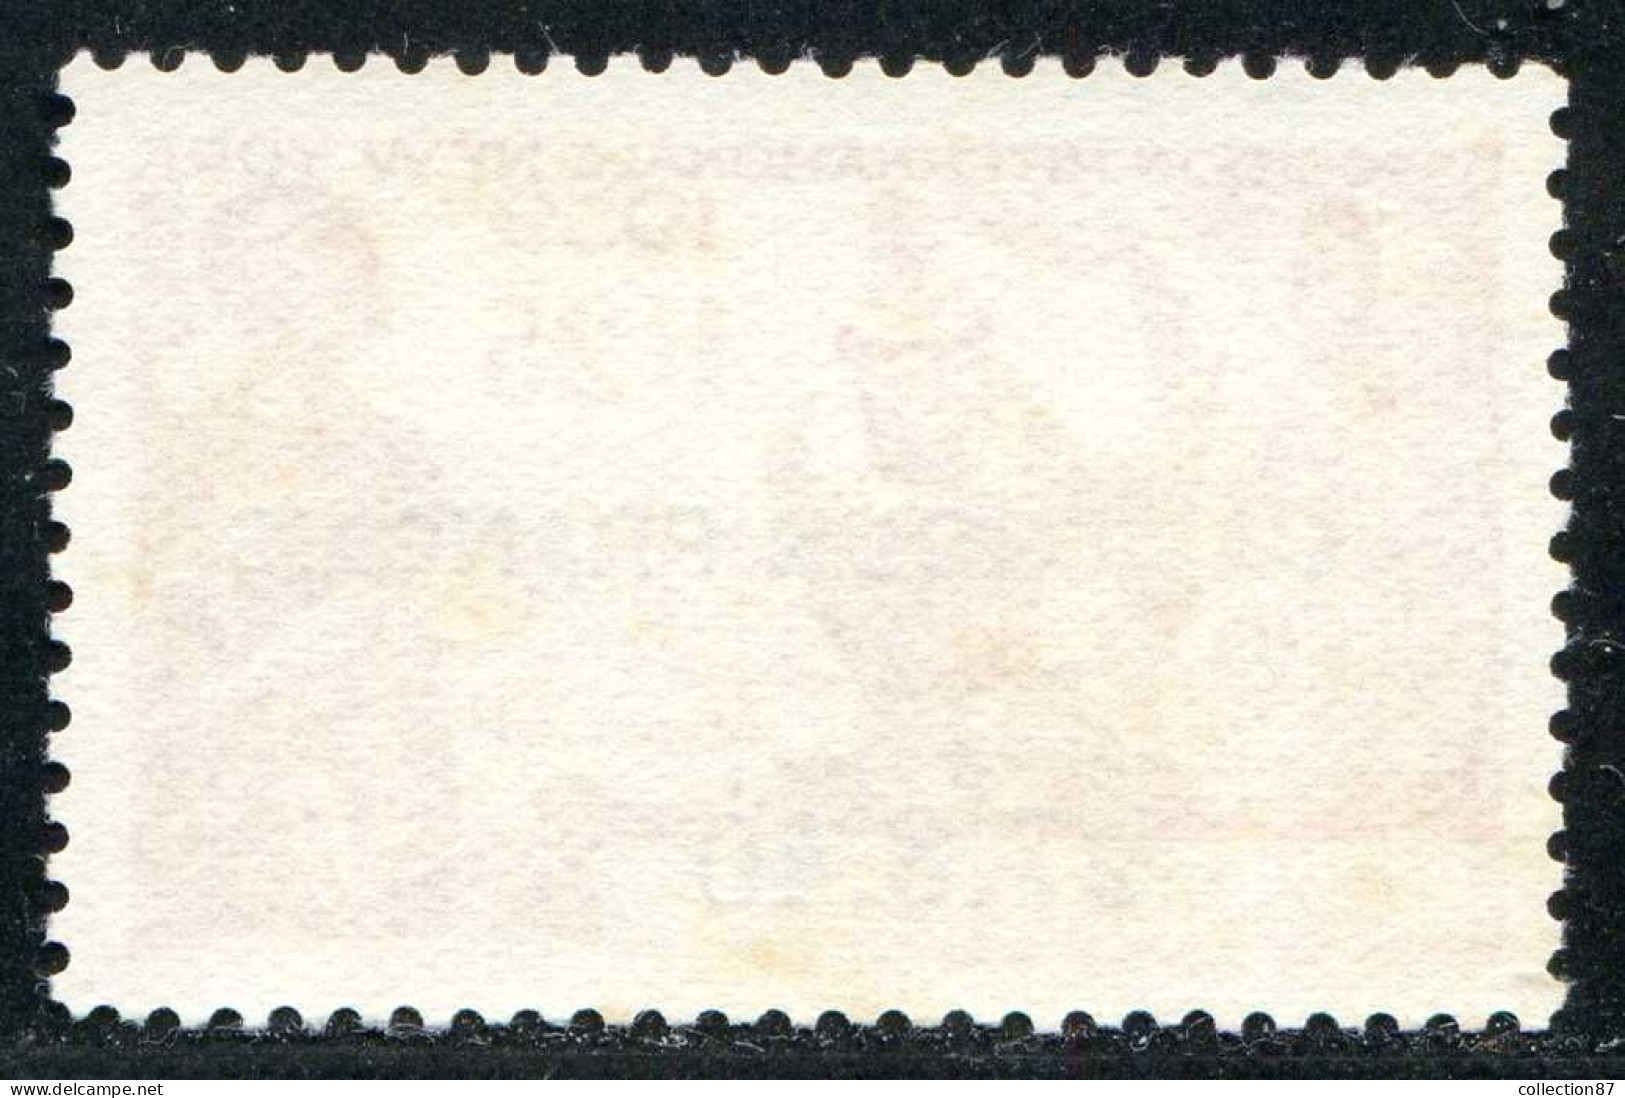 REF090 > CAMEROUN < Yv N° 206 (*) Neuf Sans Gomme Dos Visible - MH (*) - Exposition New York 1939 - Ongebruikt